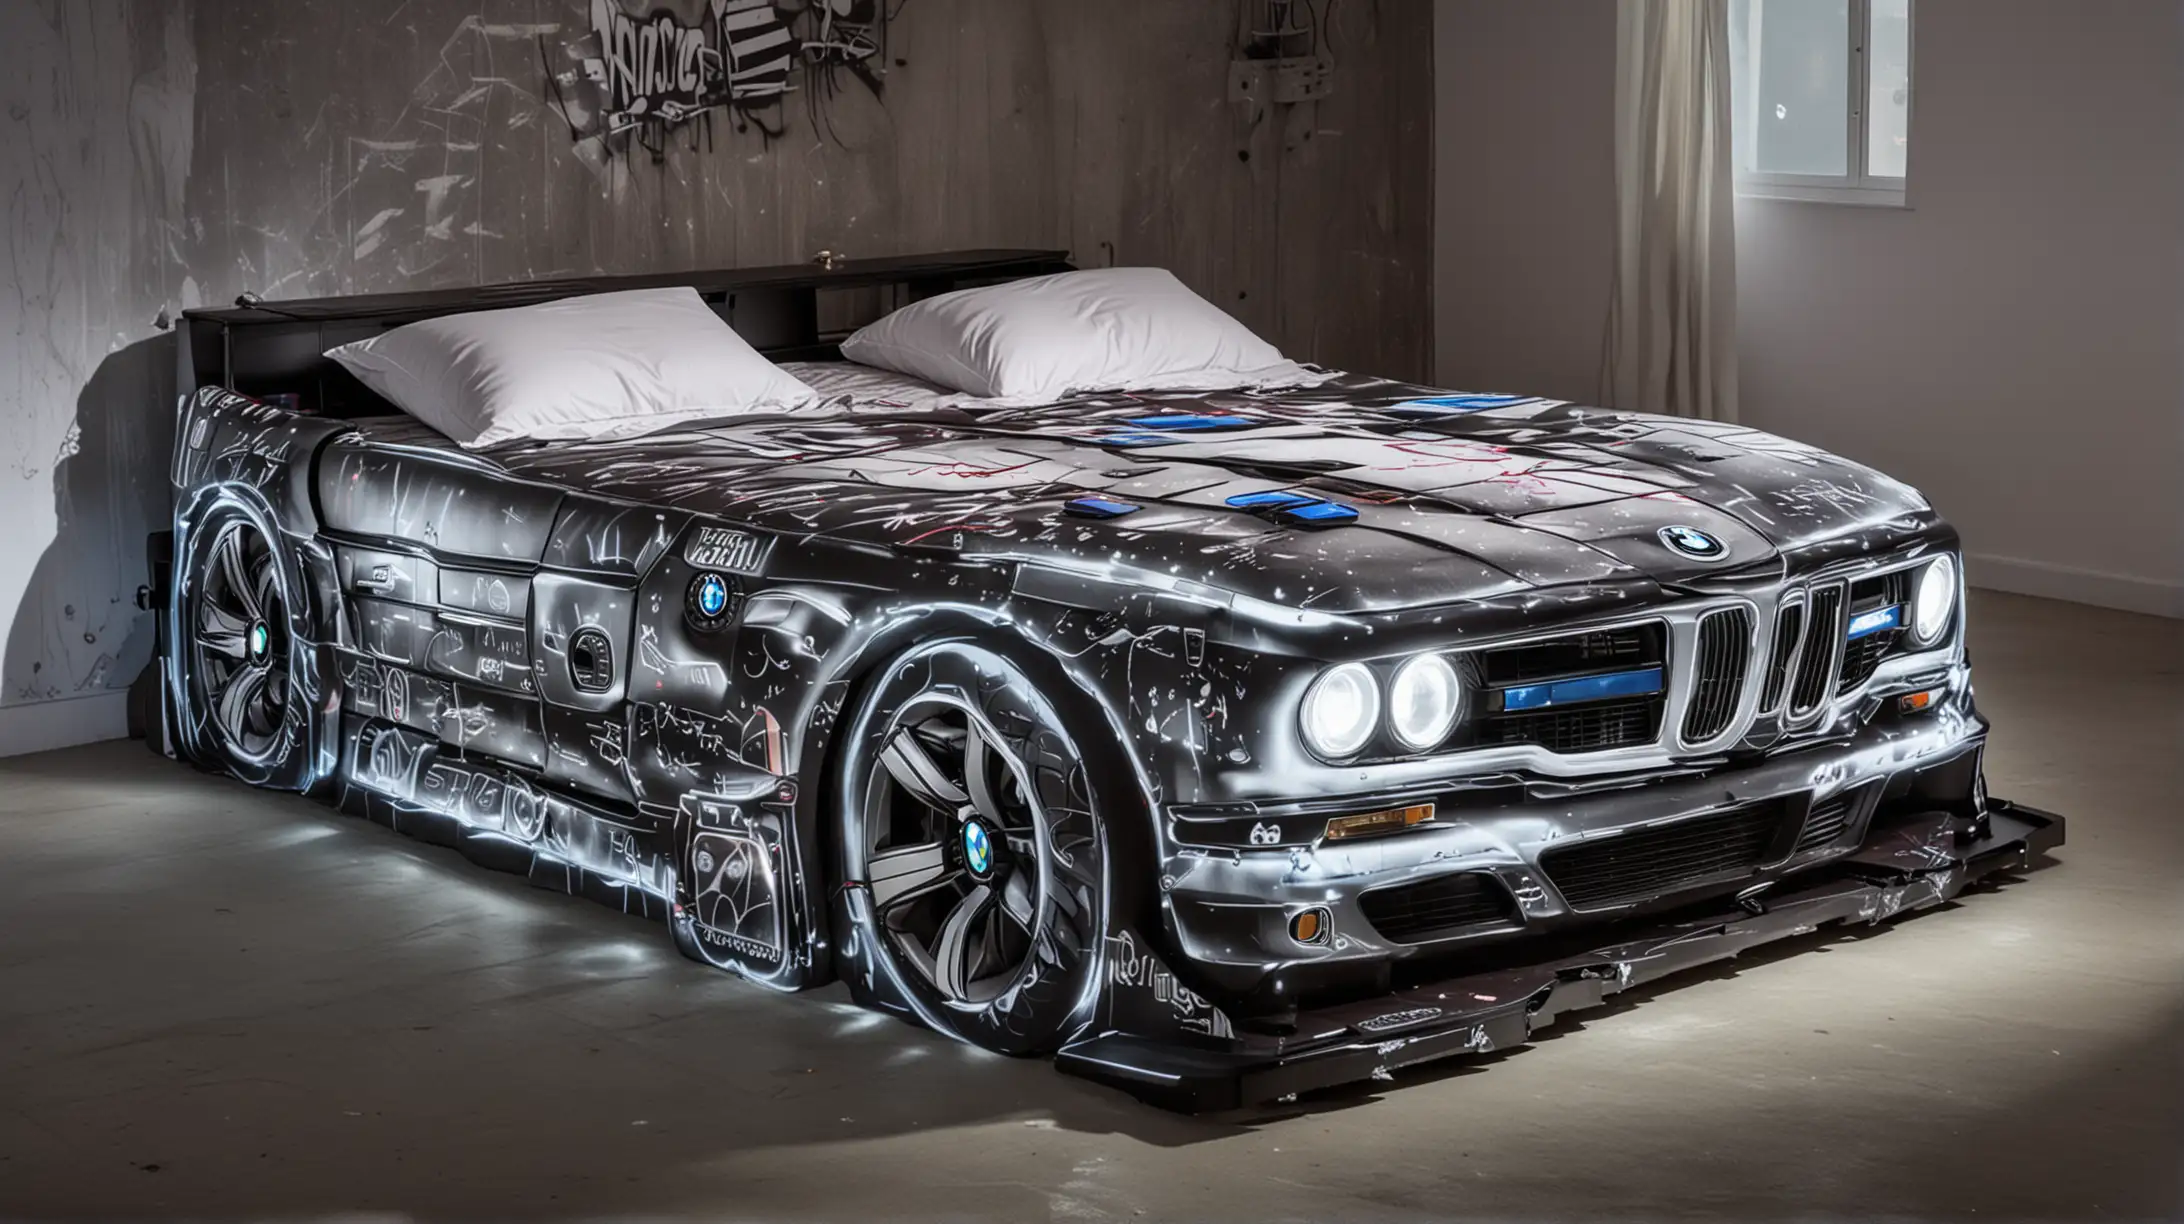 BMW Car Shaped Double Bed with RGB Graffiti and Illuminated Headlights